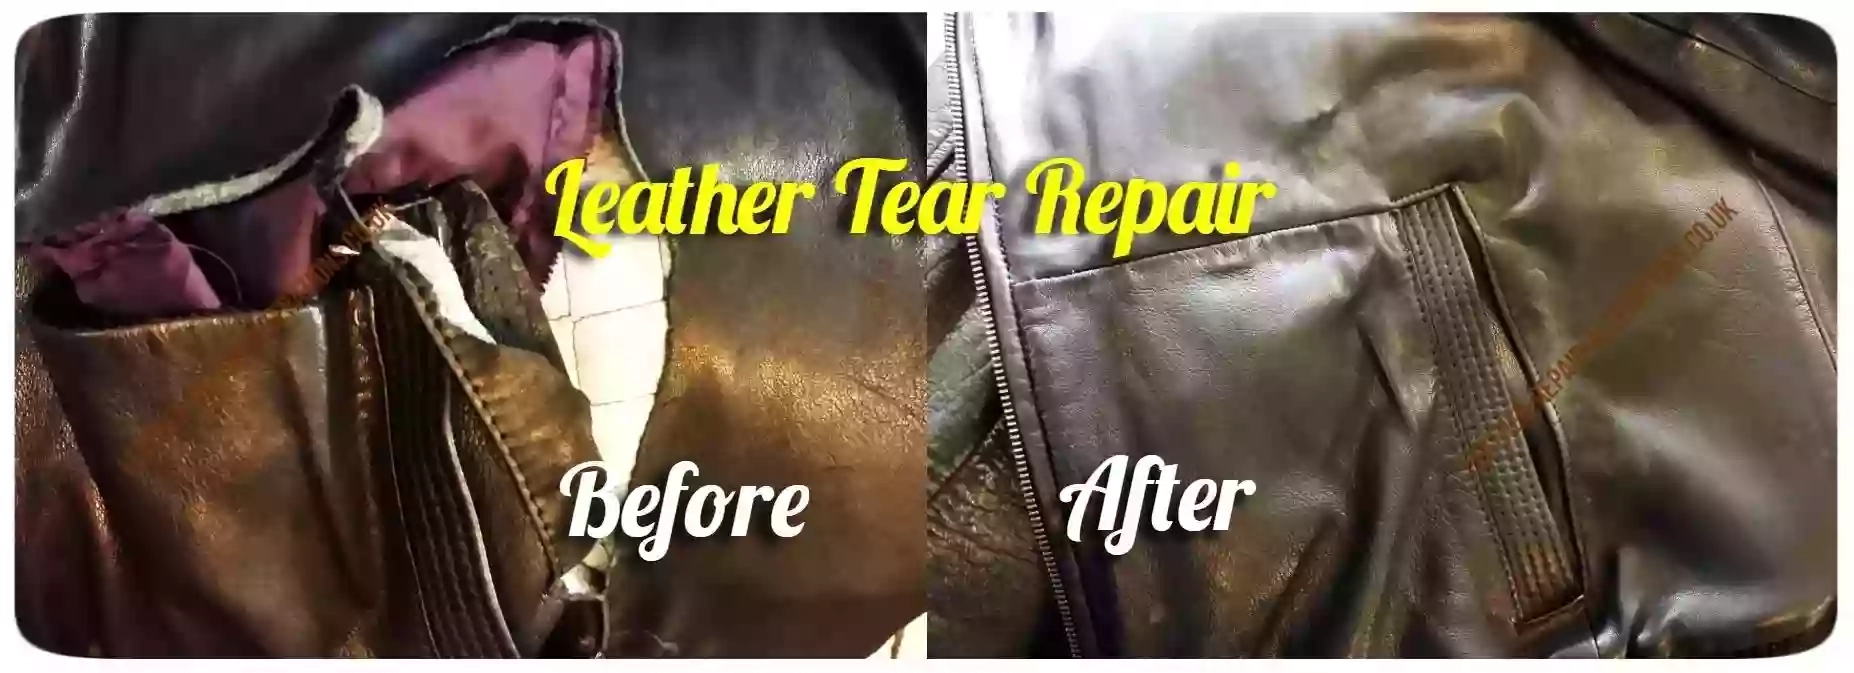 Surrey Leather Repair Alterations Services